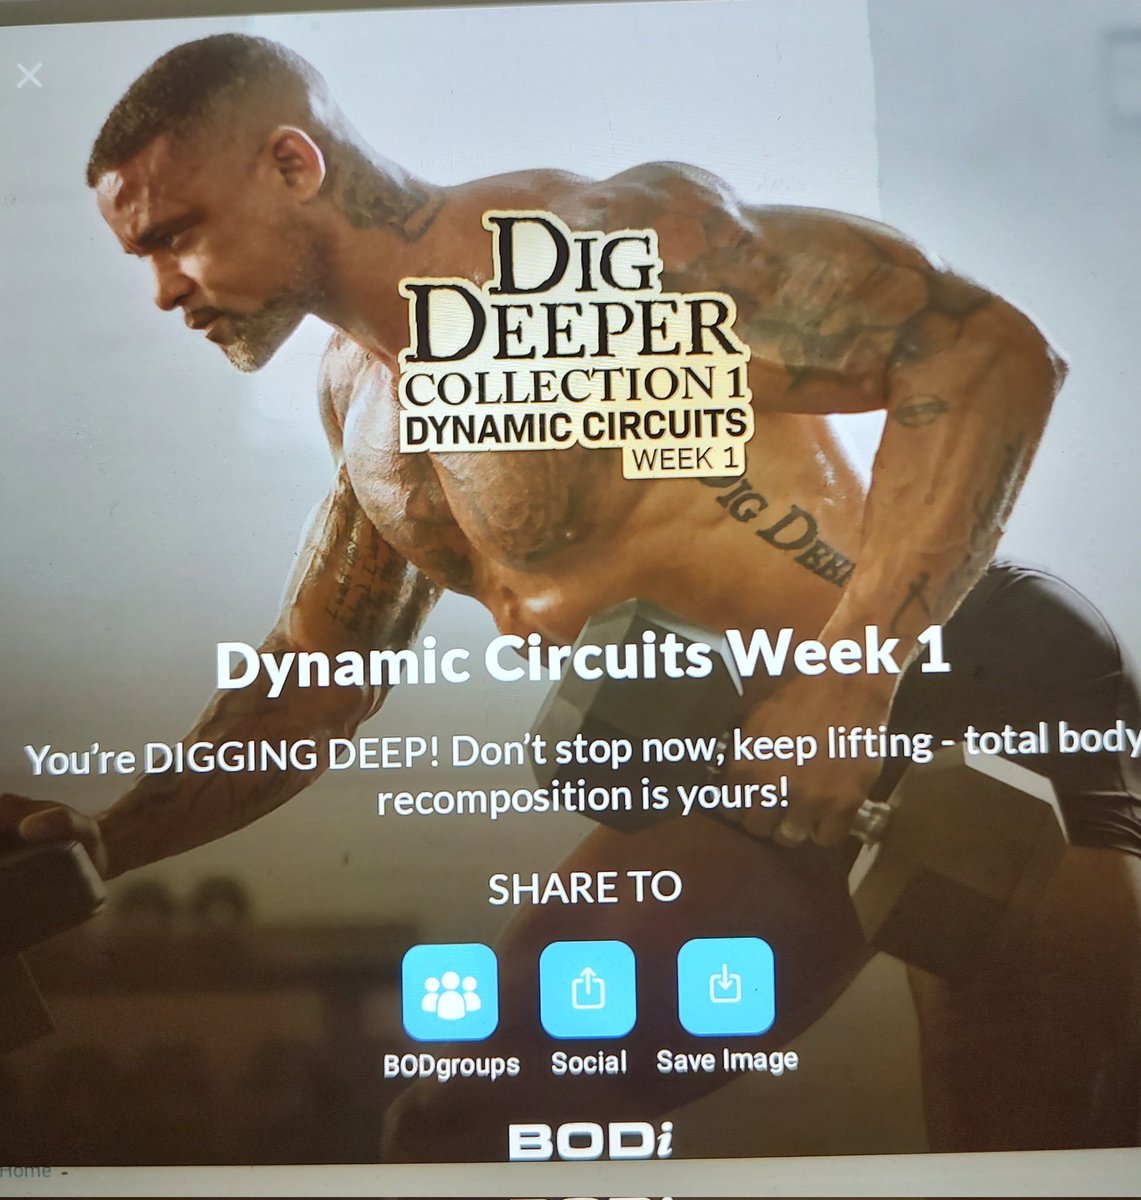 What a humbling week! Five days complered and 85 more to go! 💪💪#DigDeeper